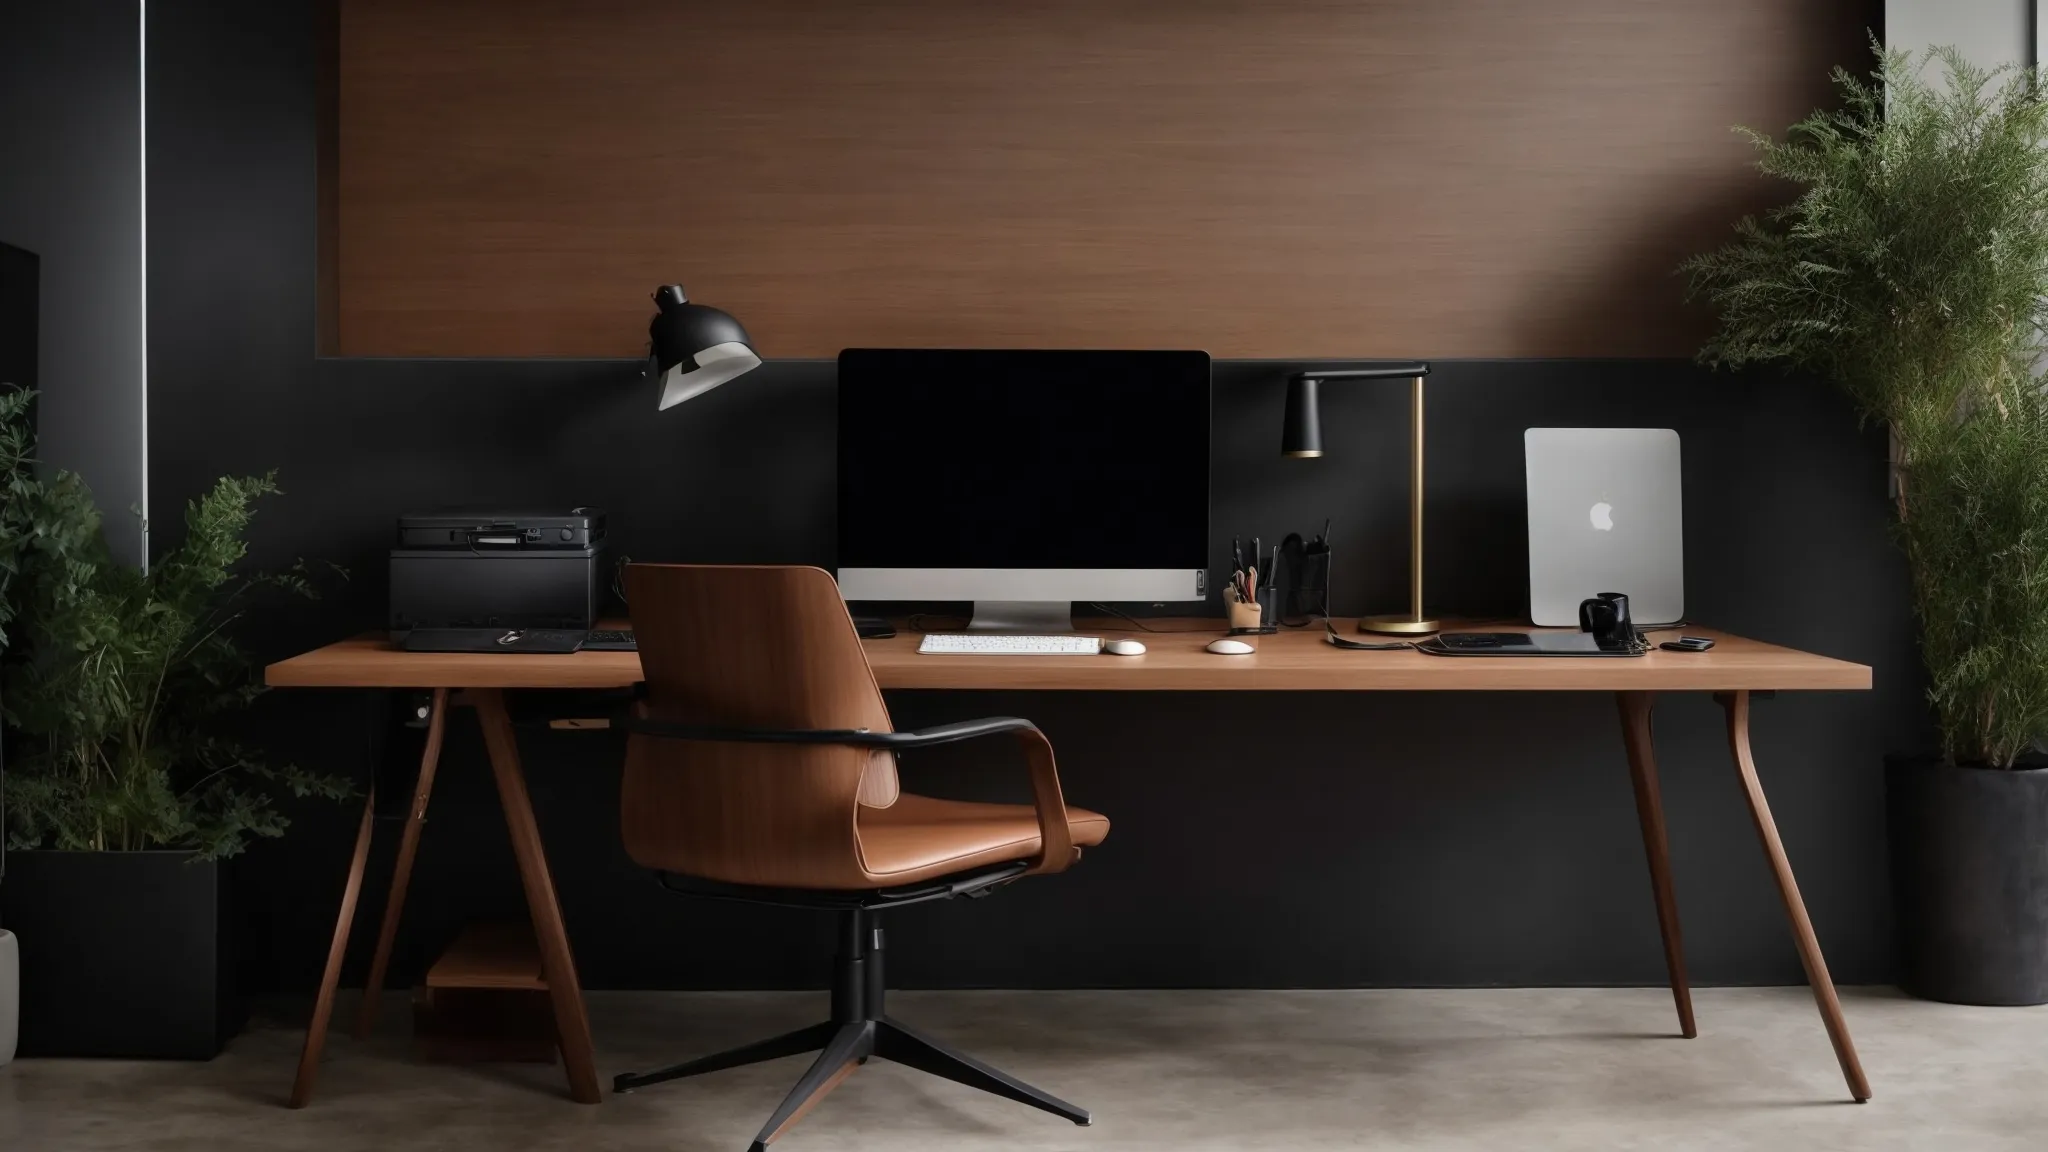 a sleek, modern office desk with a minimalist computer setup, surrounded by subtle branding elements that reflect the company's aesthetic.